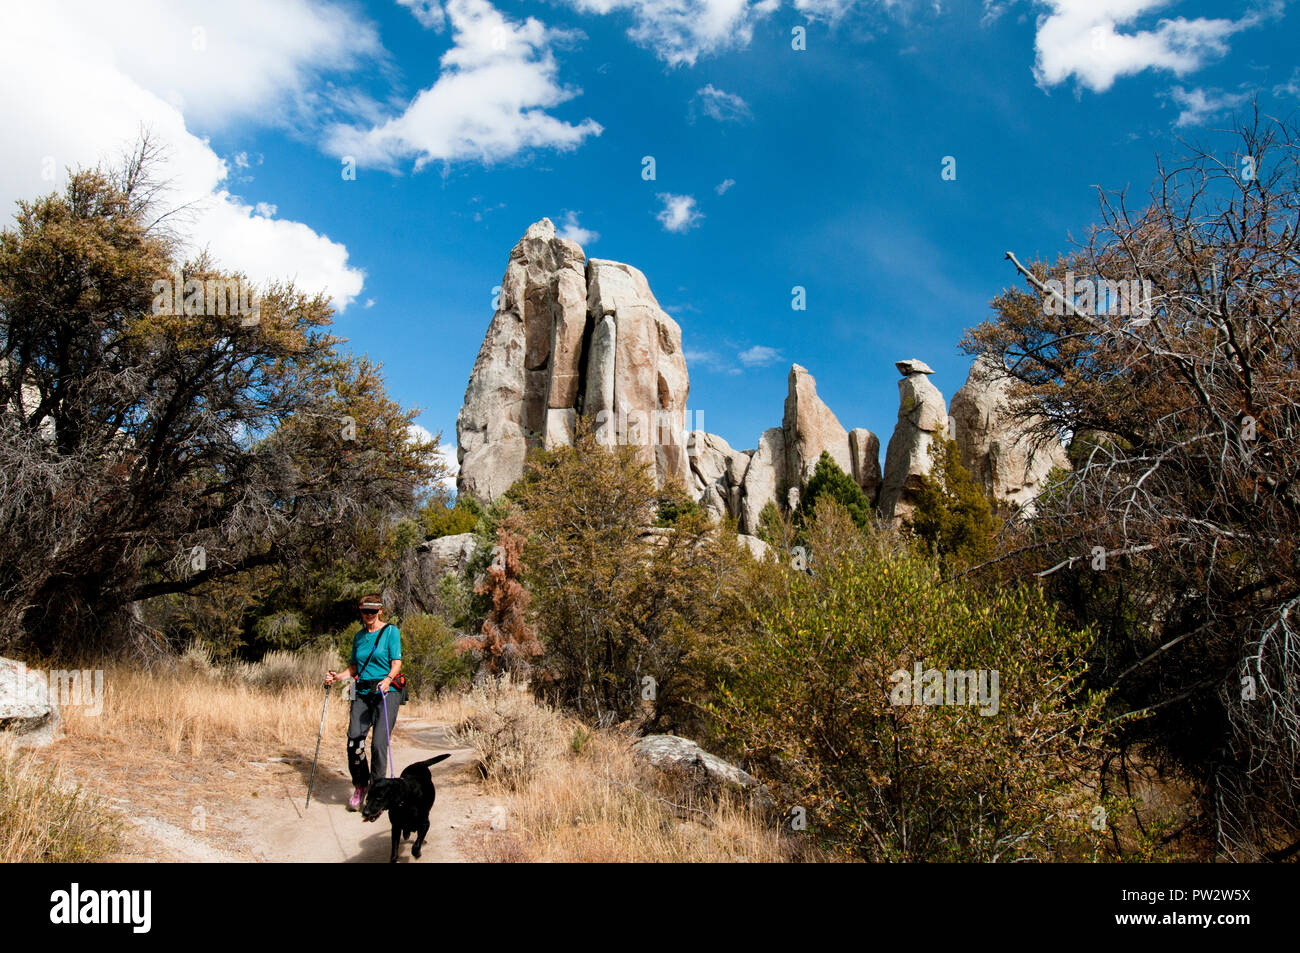 Woman hiking in City Of Rocks National Reserve in south-central Idaho Stock Photo